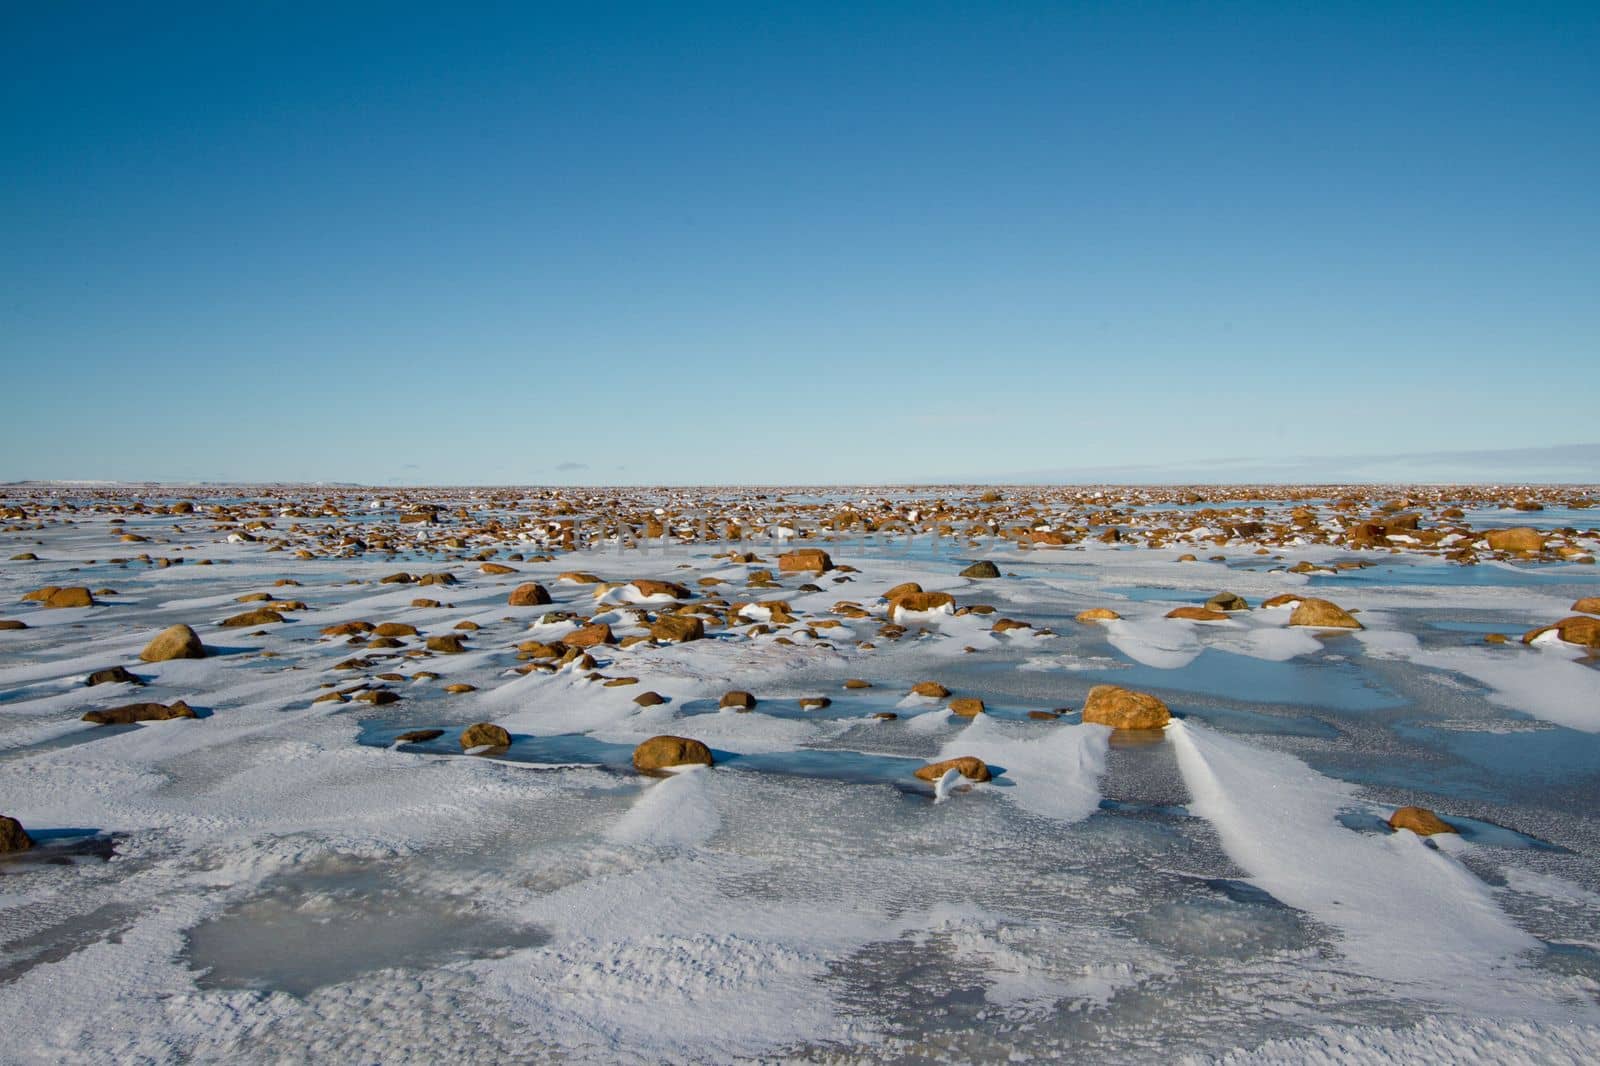 Arctic landscape - frozen arctic tundra in Nunavut over a rocky snow covered waterbody on a clear cold day by Granchinho